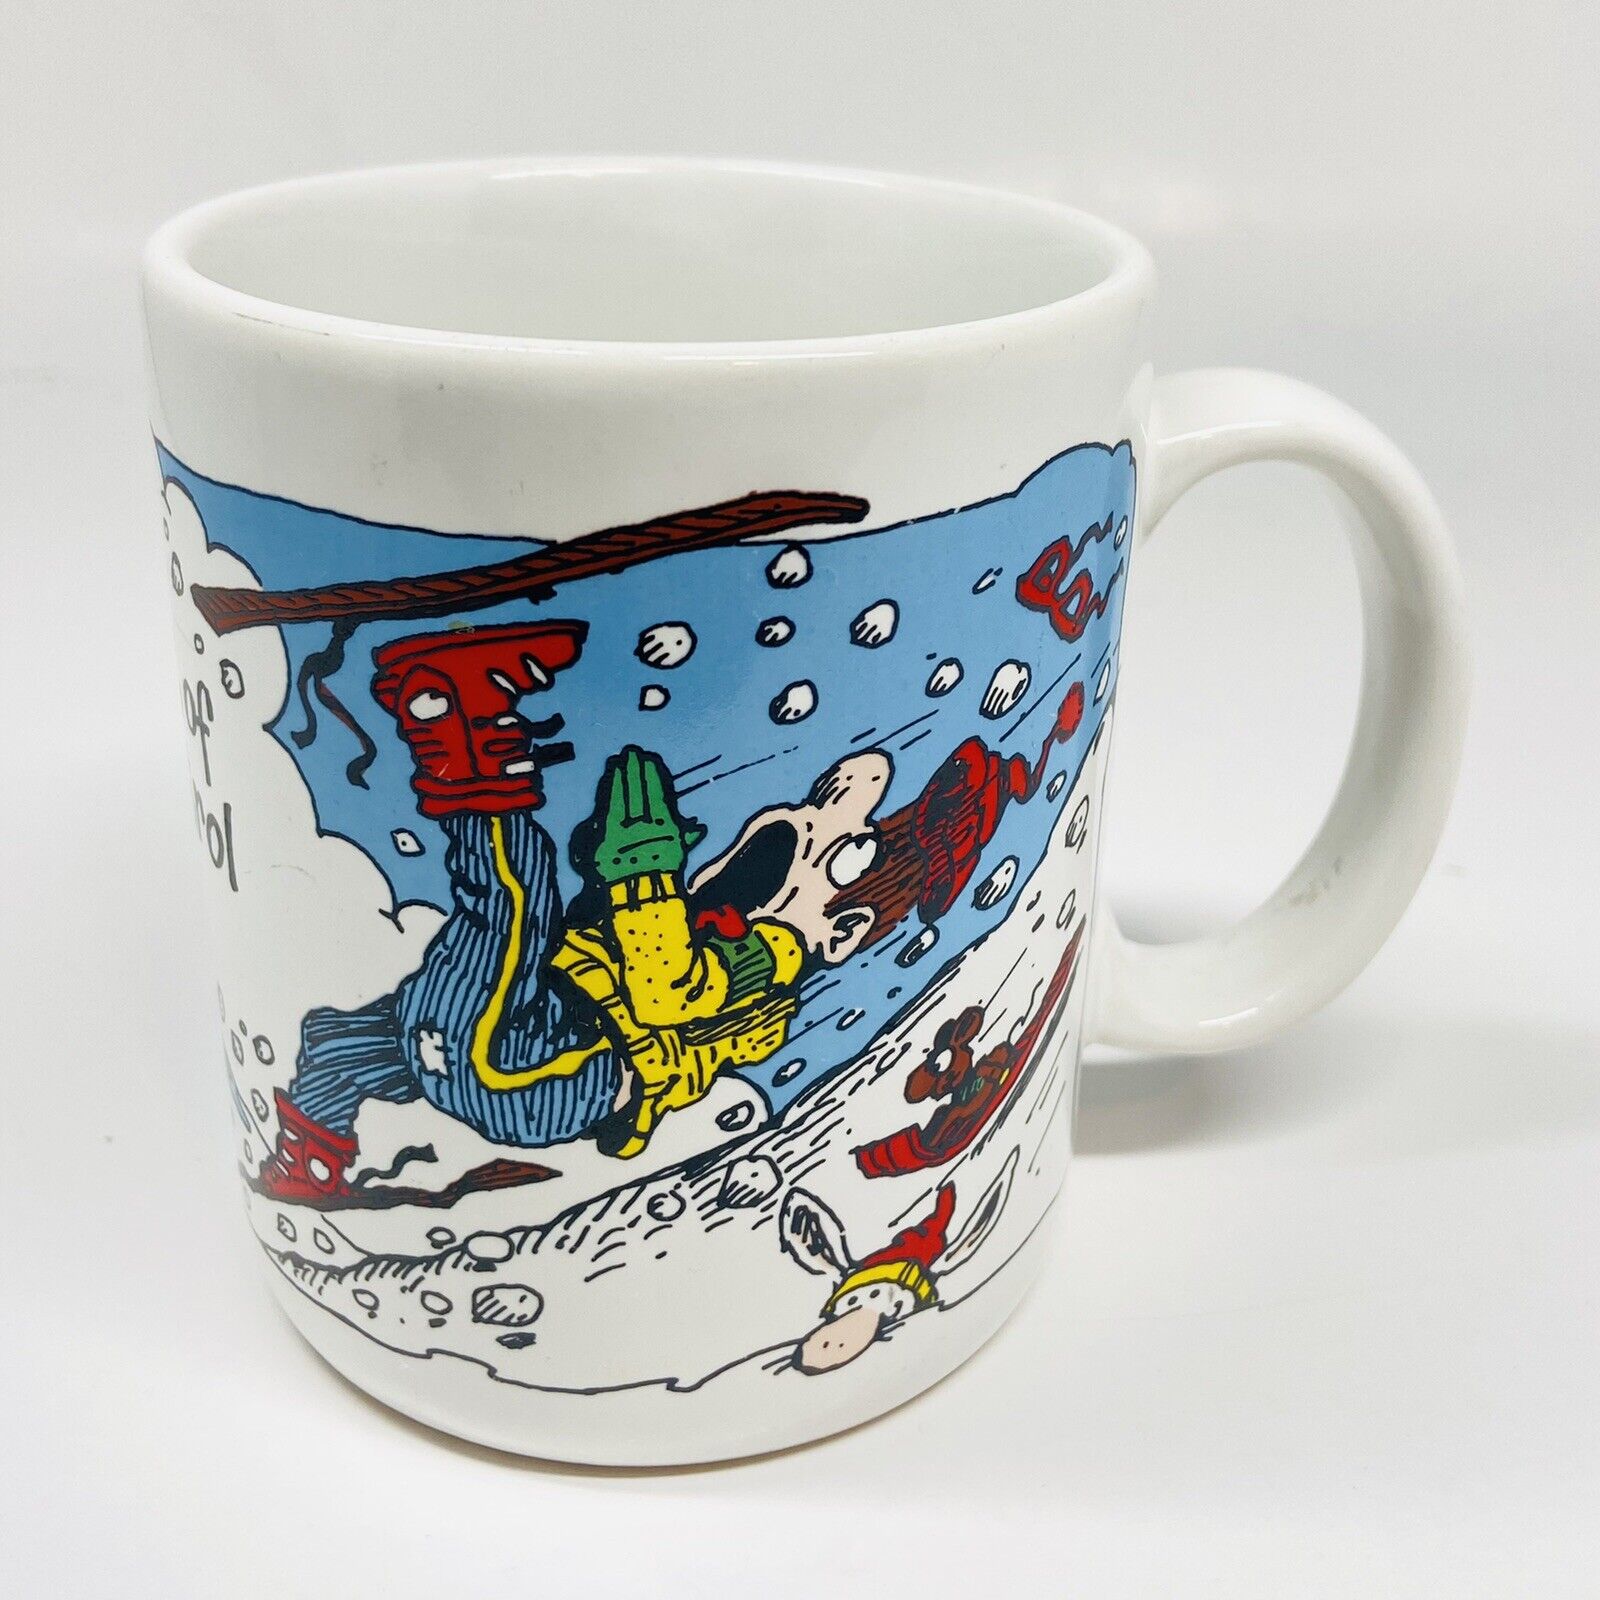 VTG Gary Patterson 12 oz Mug Out of Control Ski By Thought Factory Japan